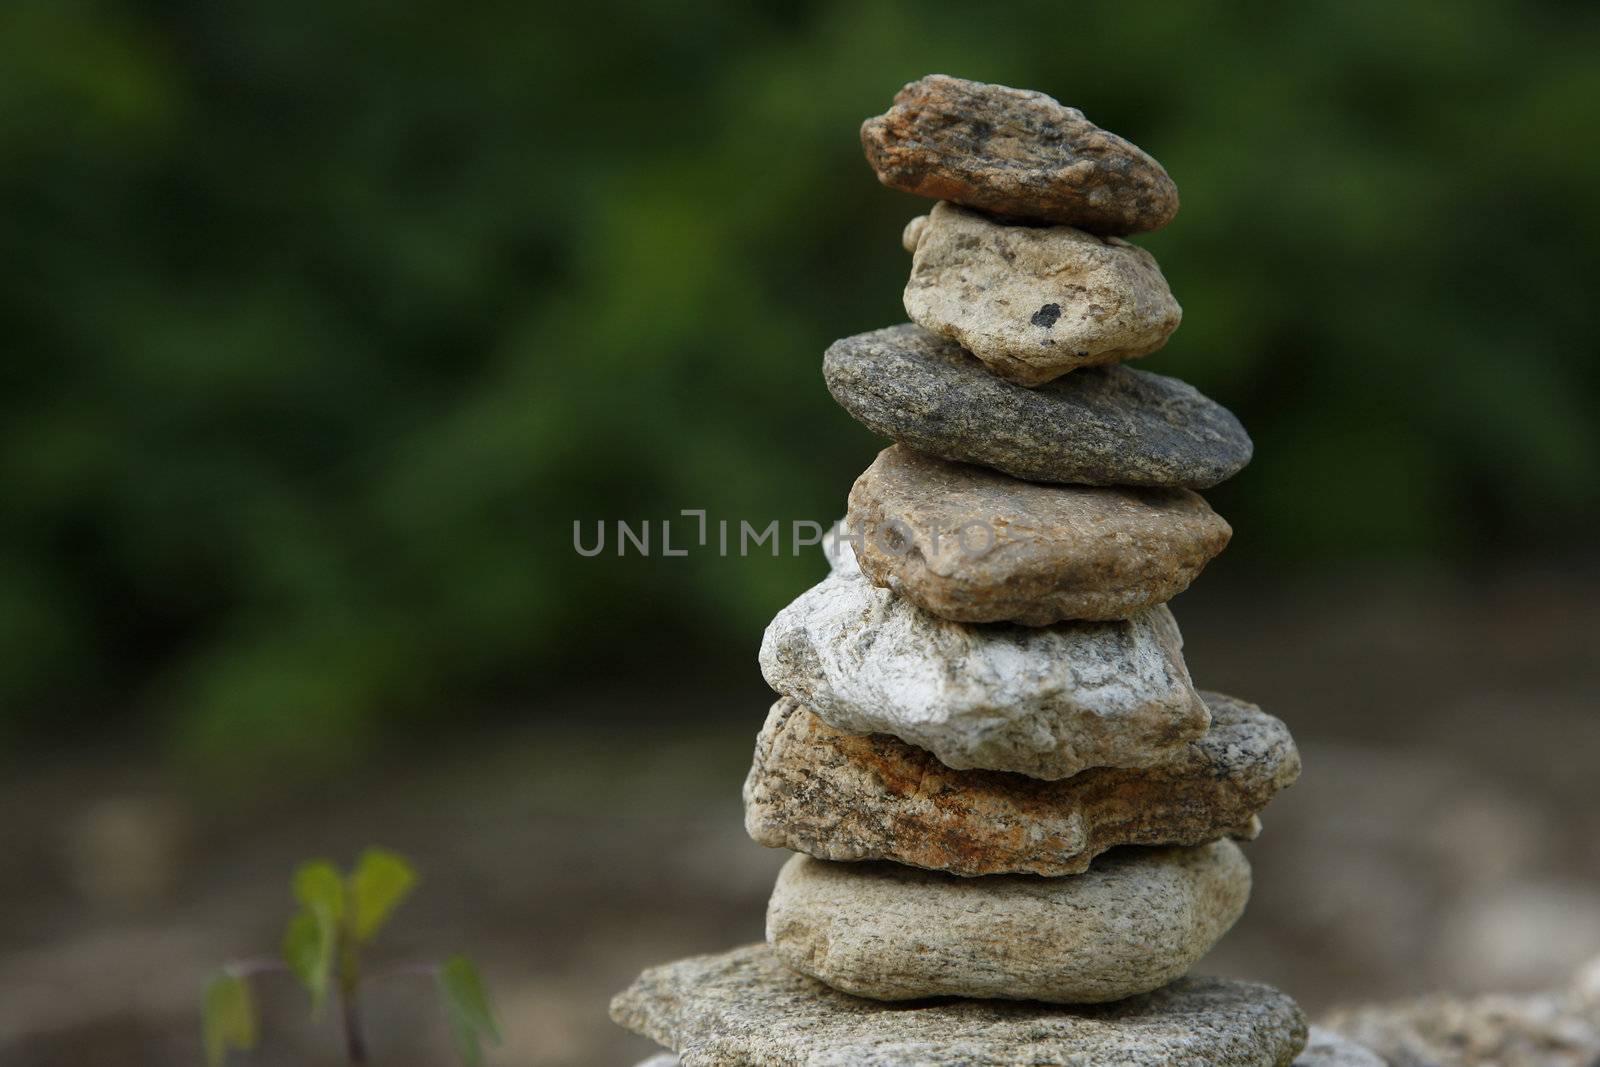 A zen-like picture of a stack of rocks with a blurred background